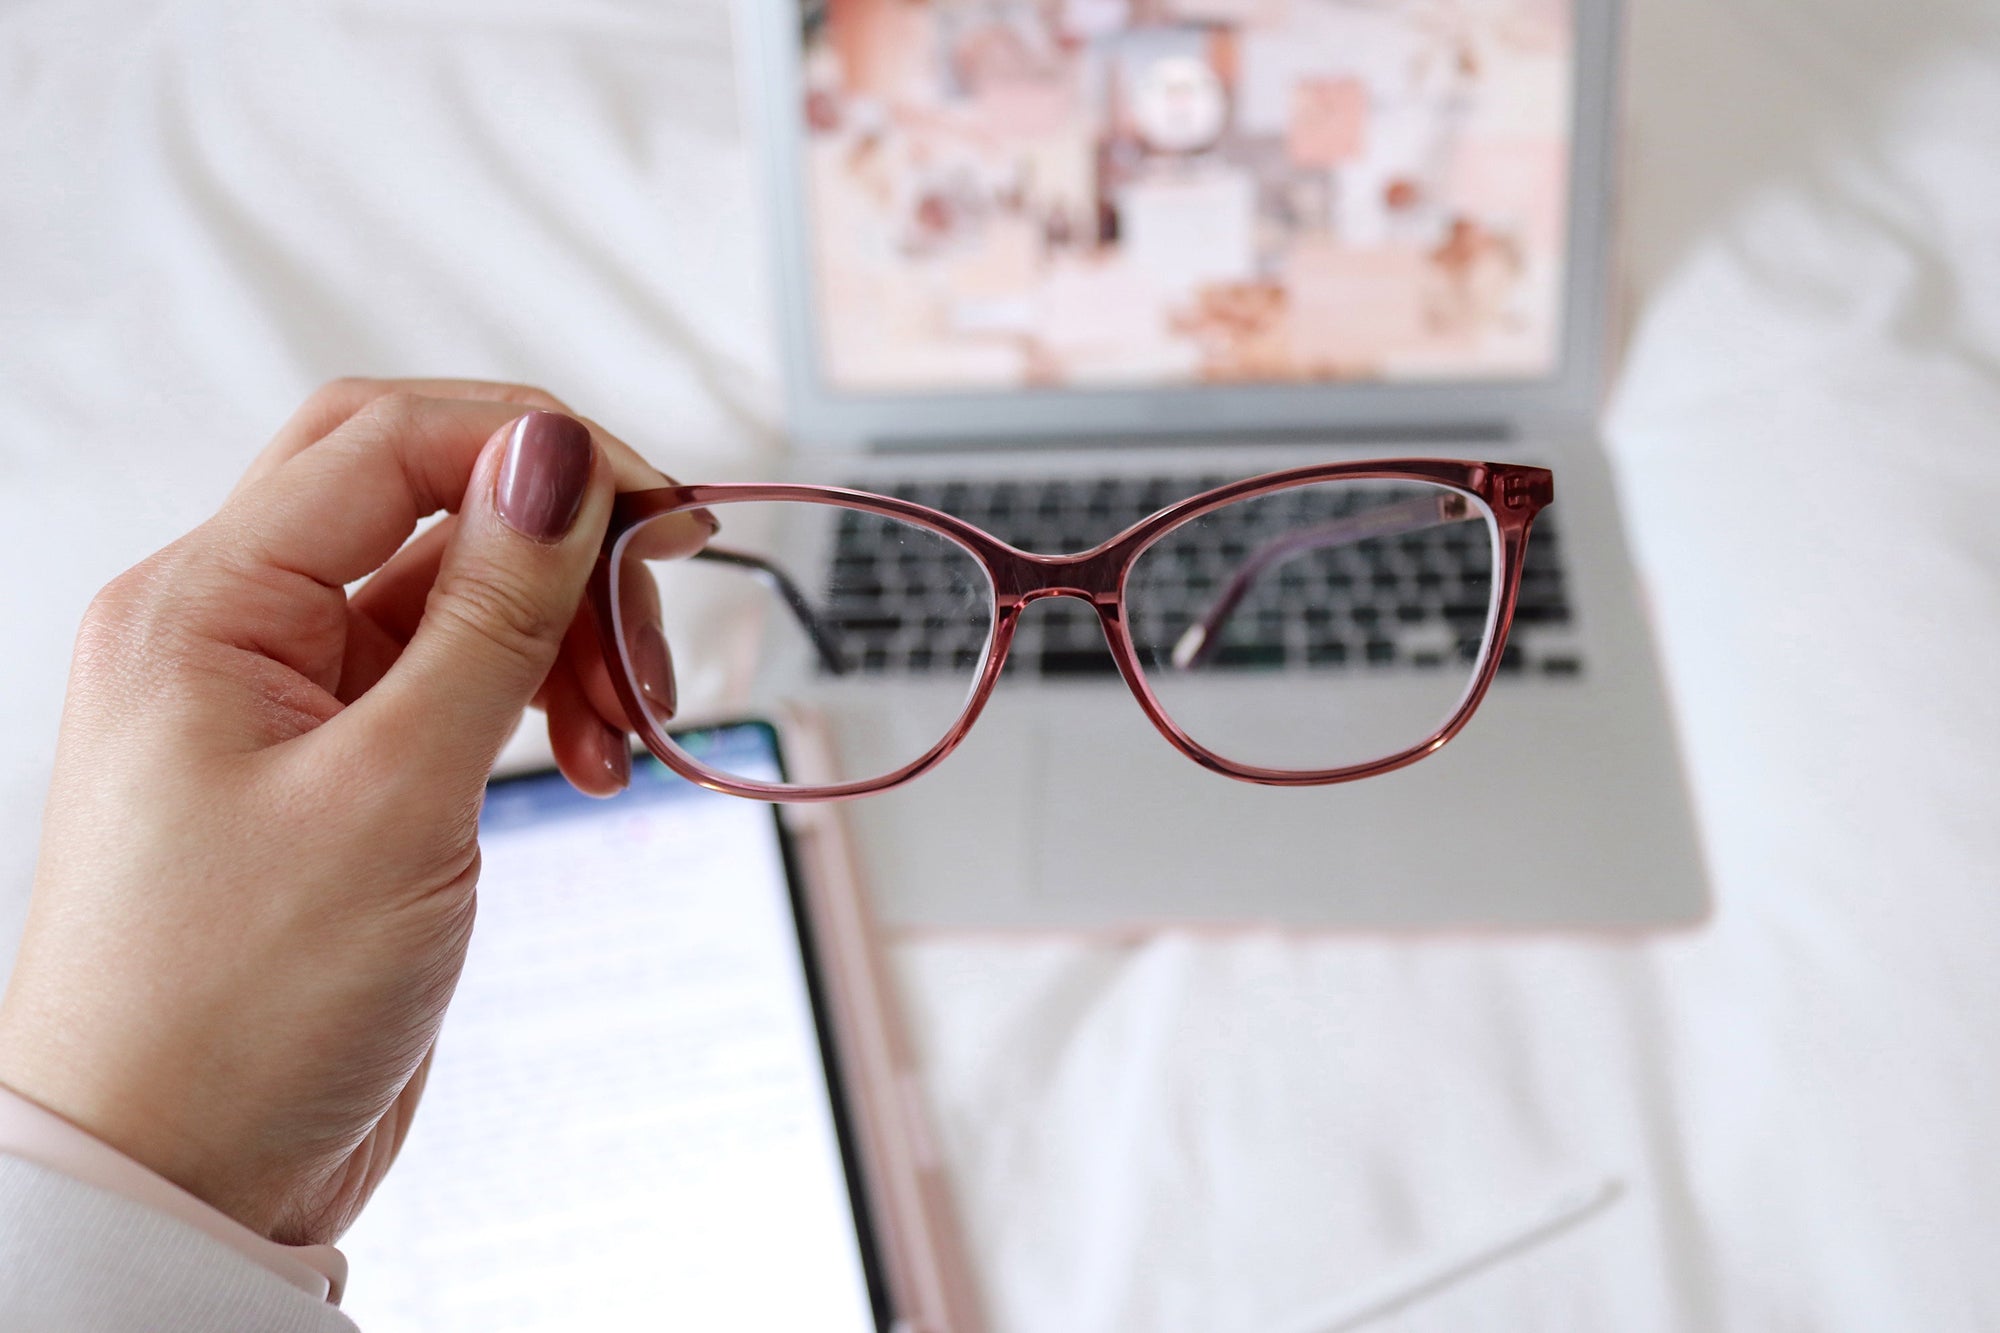 how much does an eye exam at lenscrafters cost? | KOALAEYE OPTICAL